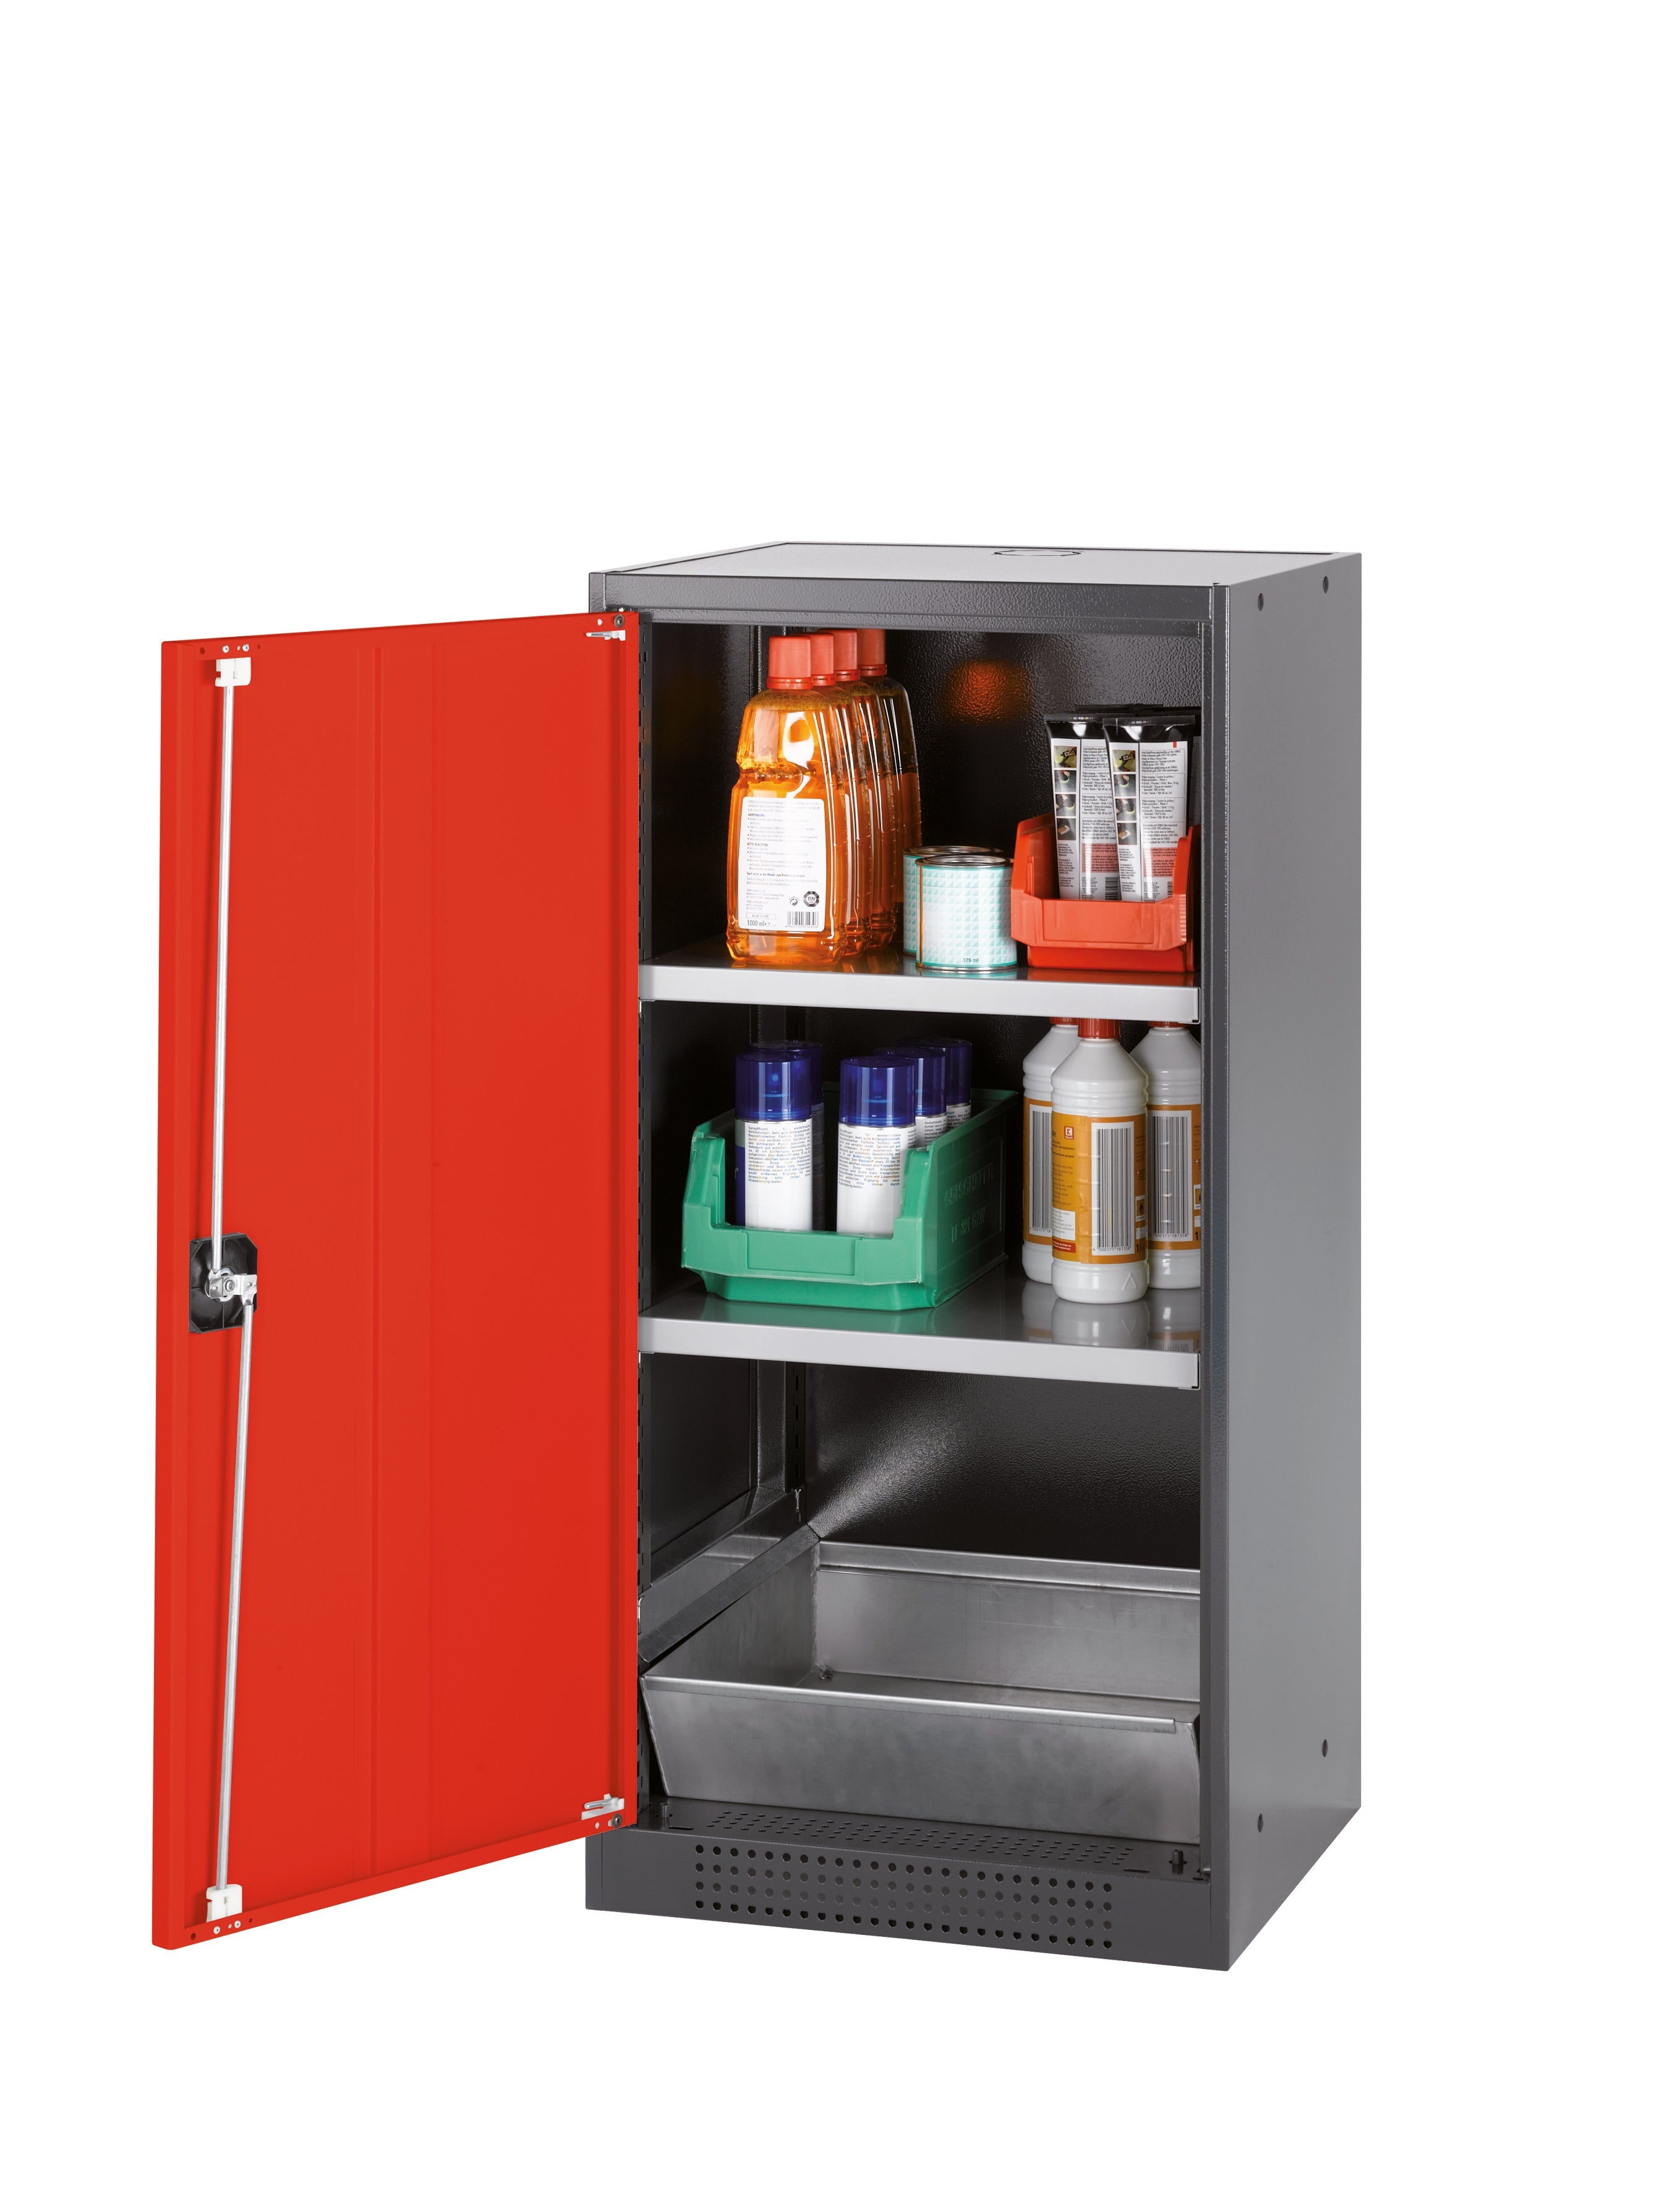 Chemical cabinet CS-CLASSIC model CS.110.054 in traffic red RAL 3020 with 2x standard shelves (sheet steel)